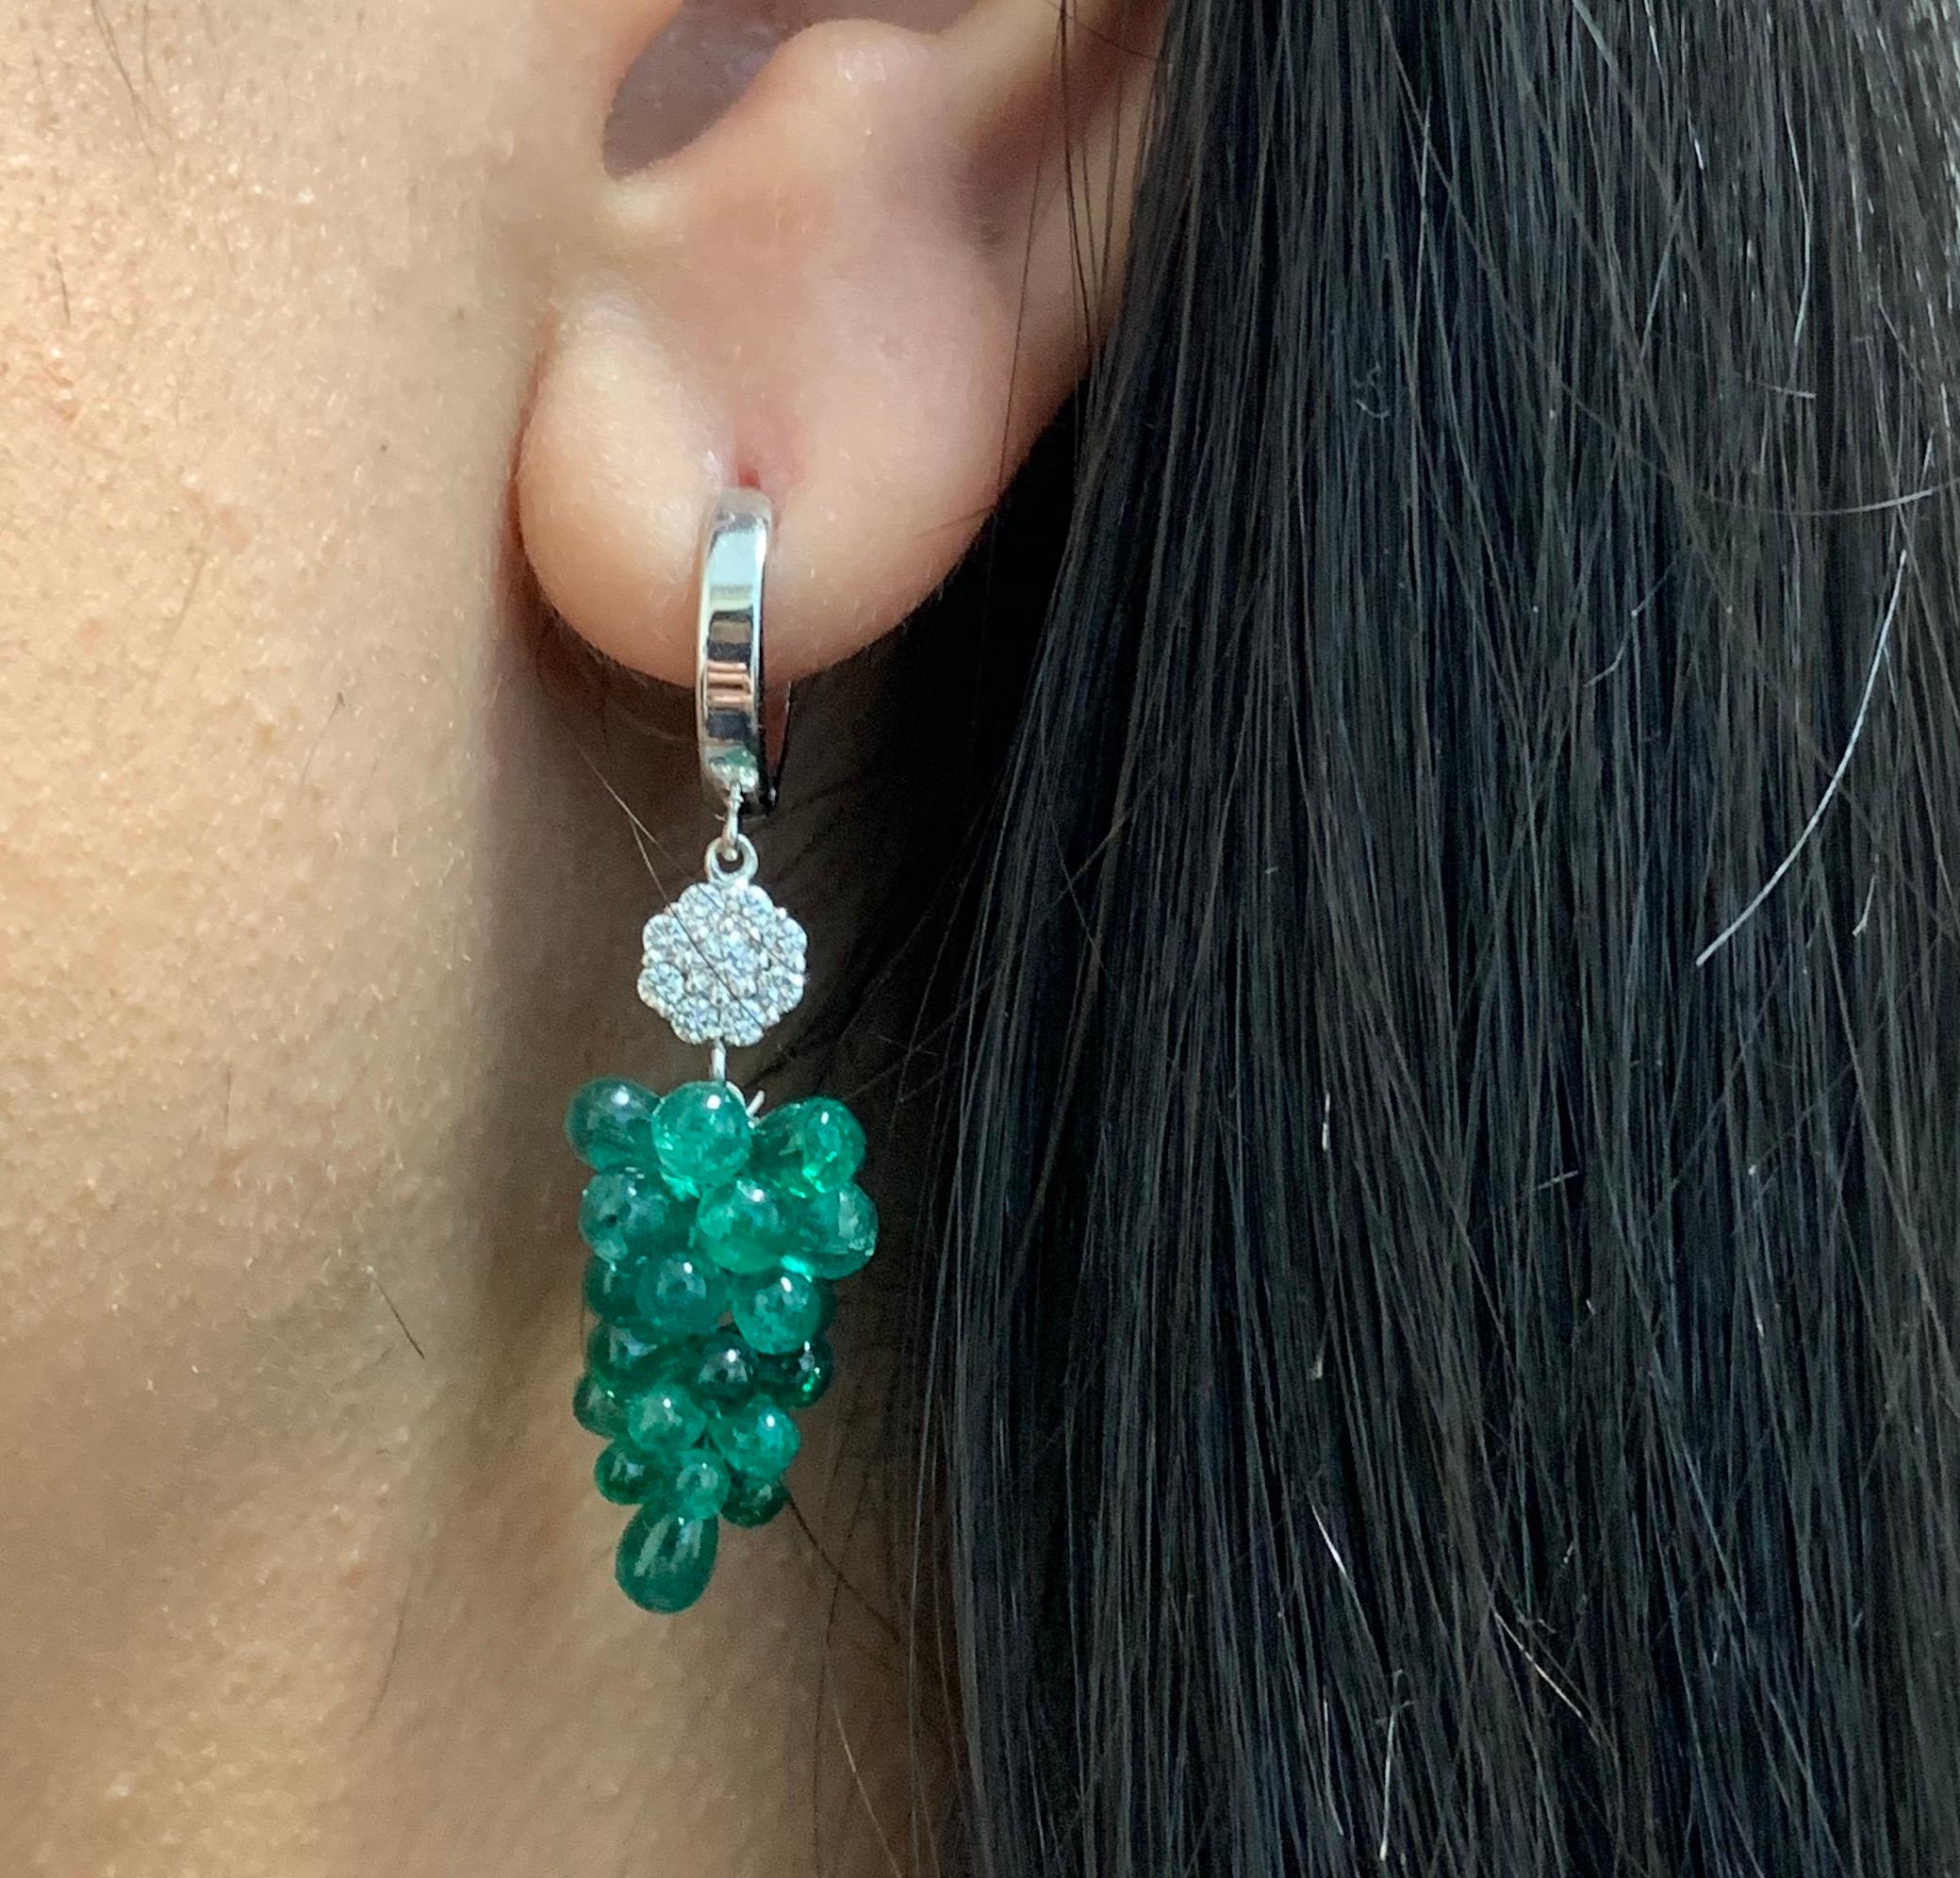 Material: 14k White Gold 
Stone Details: 2 Briolette Emeralds at 18.70 Carats Total
Diamond Details: 18 Round White Diamonds at 0.42 Carats Total- Clarity: SI / Color: H-I

Fine one-of-a-kind craftsmanship meets incredible quality in this